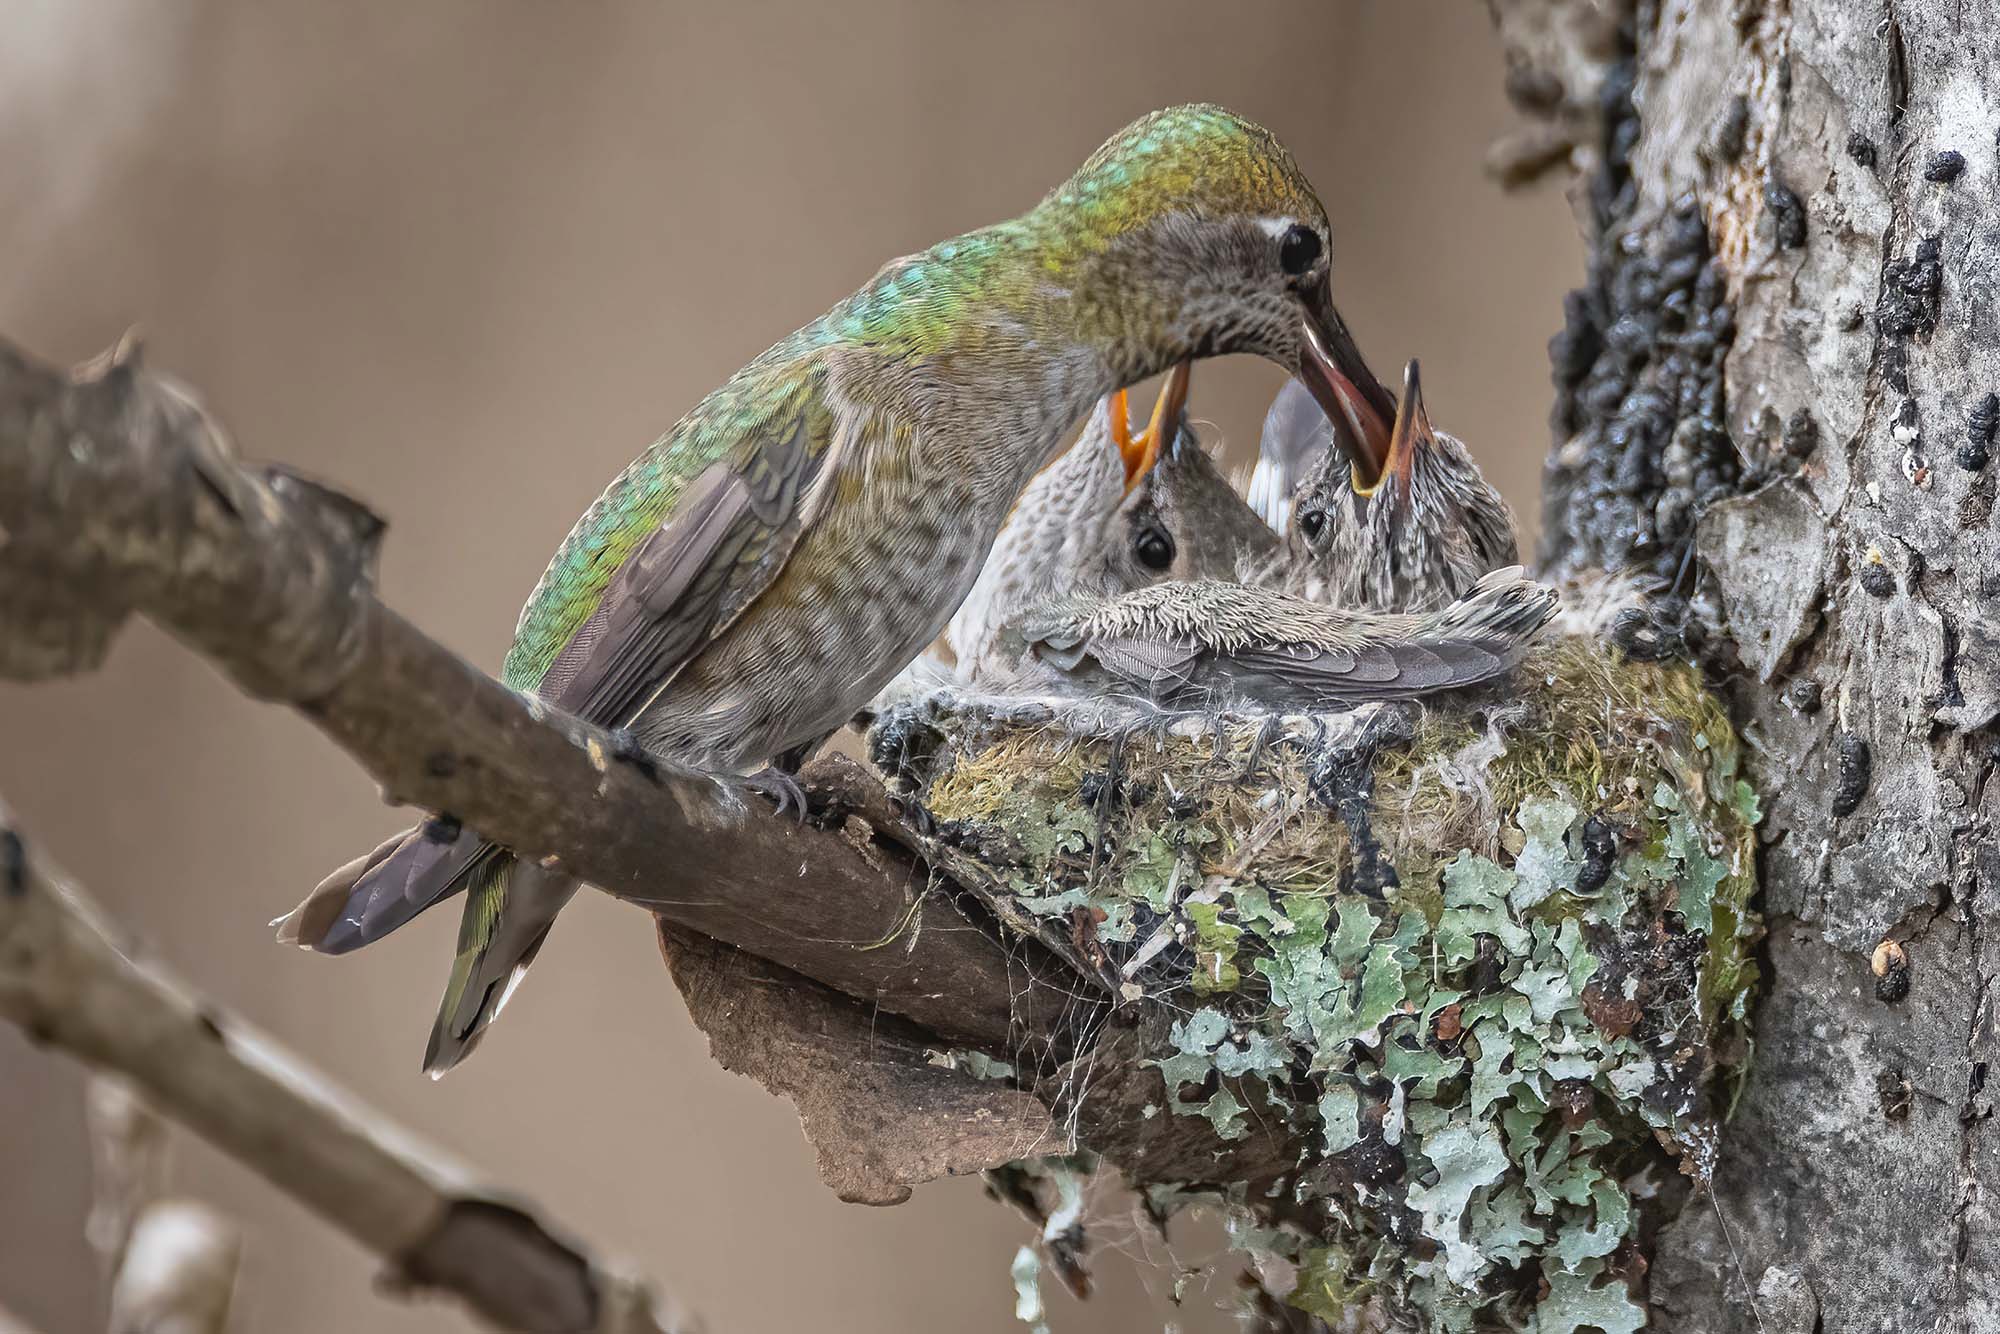 A hummingbird feeding its young in a nest build into the crook of a tree branch